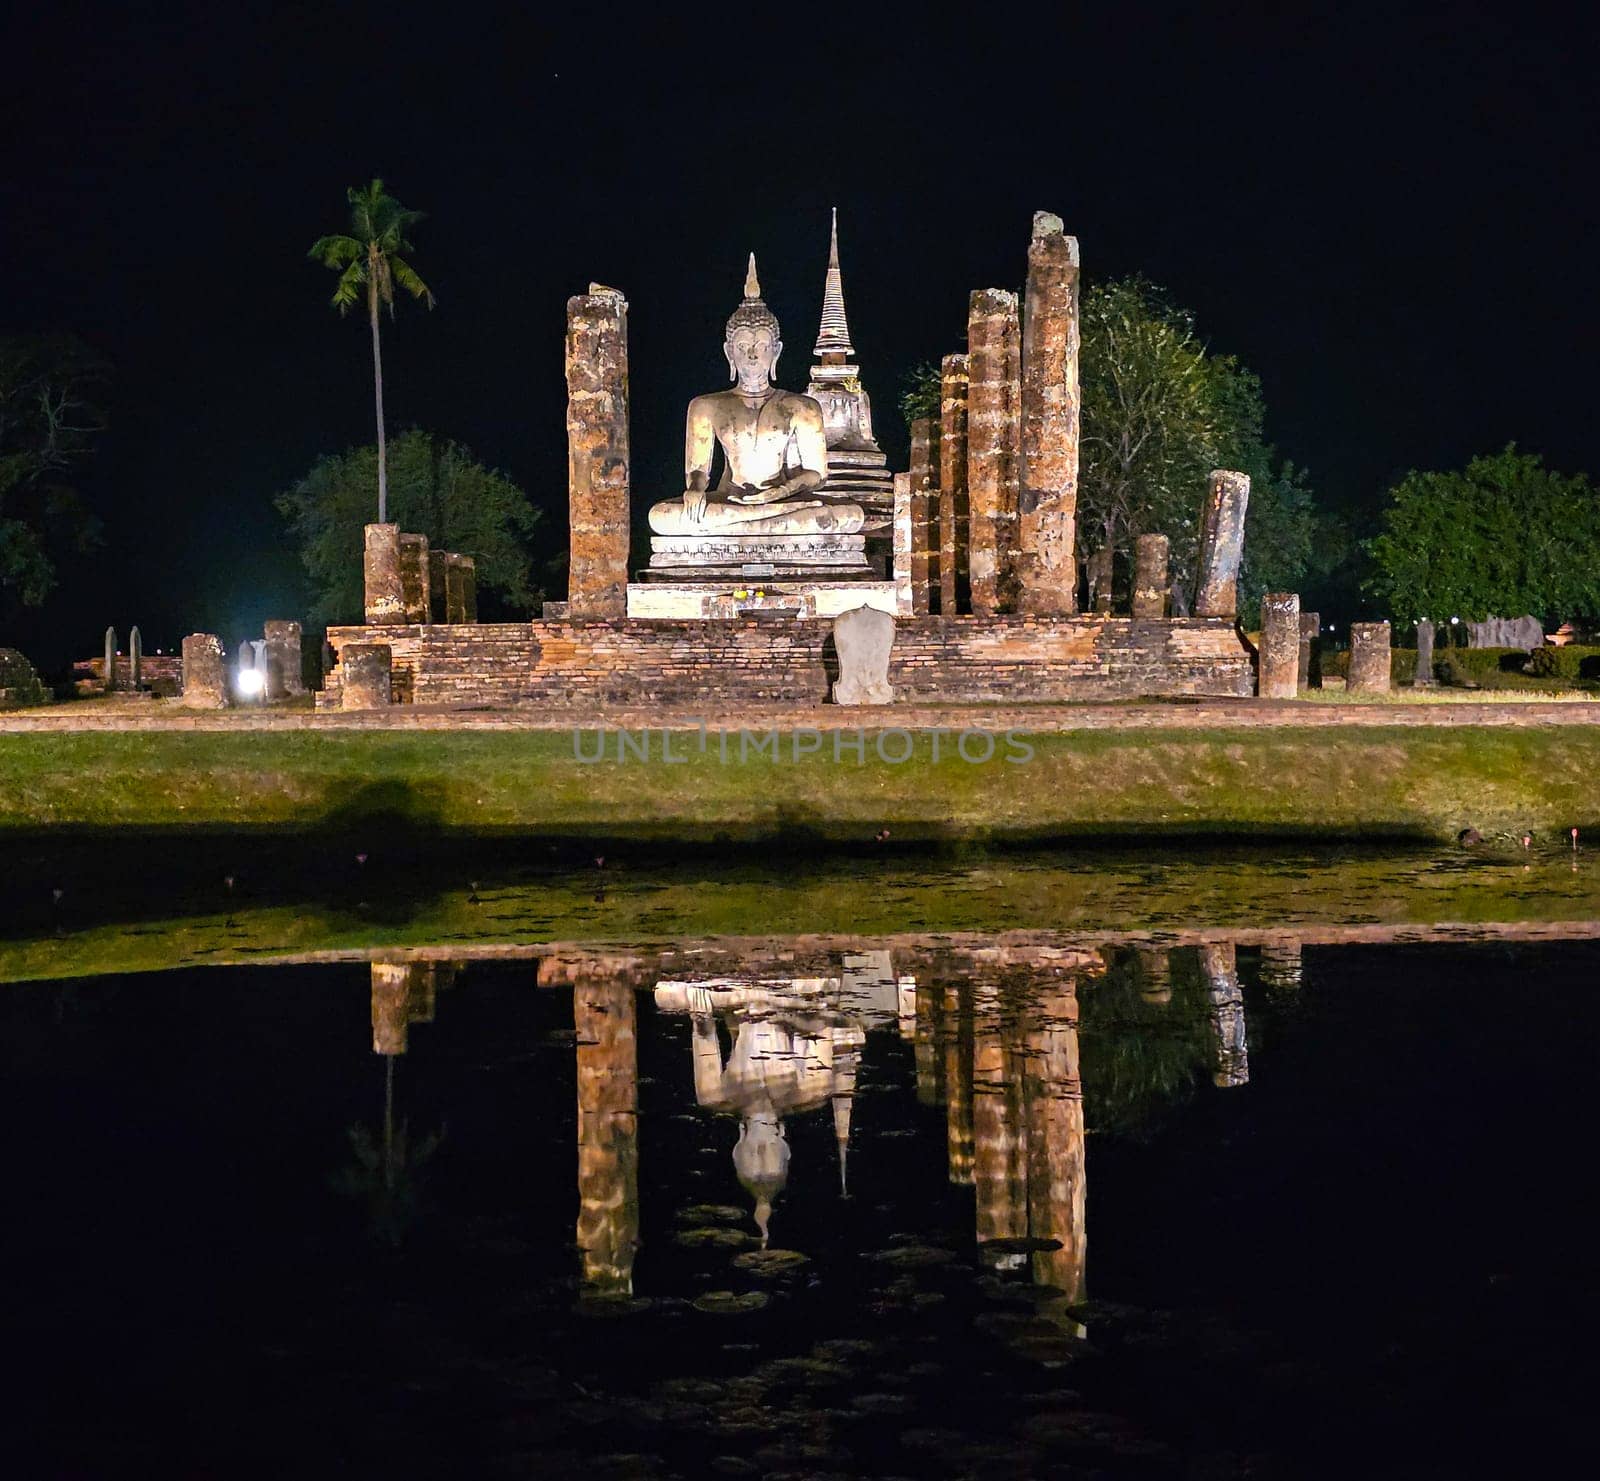 Buddha at Wat Mahathat temple in Sukhothai historical park by night, UNESCO World Heritage Site, Thailand